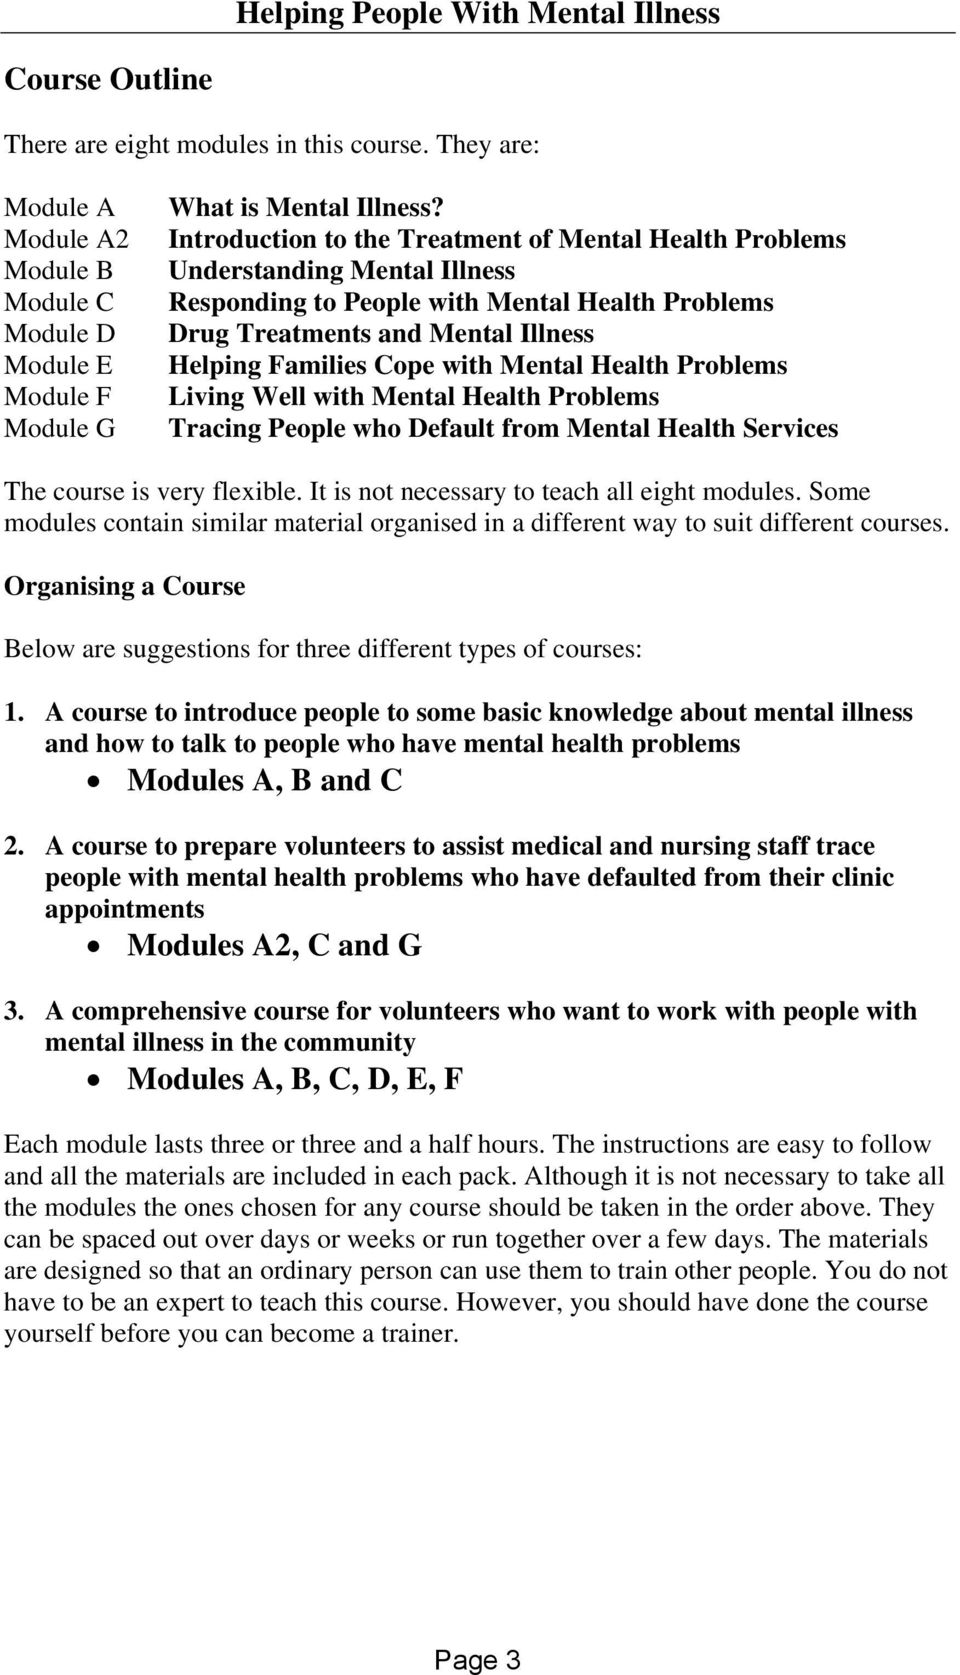 Mental Health Problems Living Well with Mental Health Problems Tracing People who Default from Mental Health Services The course is very flexible. It is not necessary to teach all eight modules.